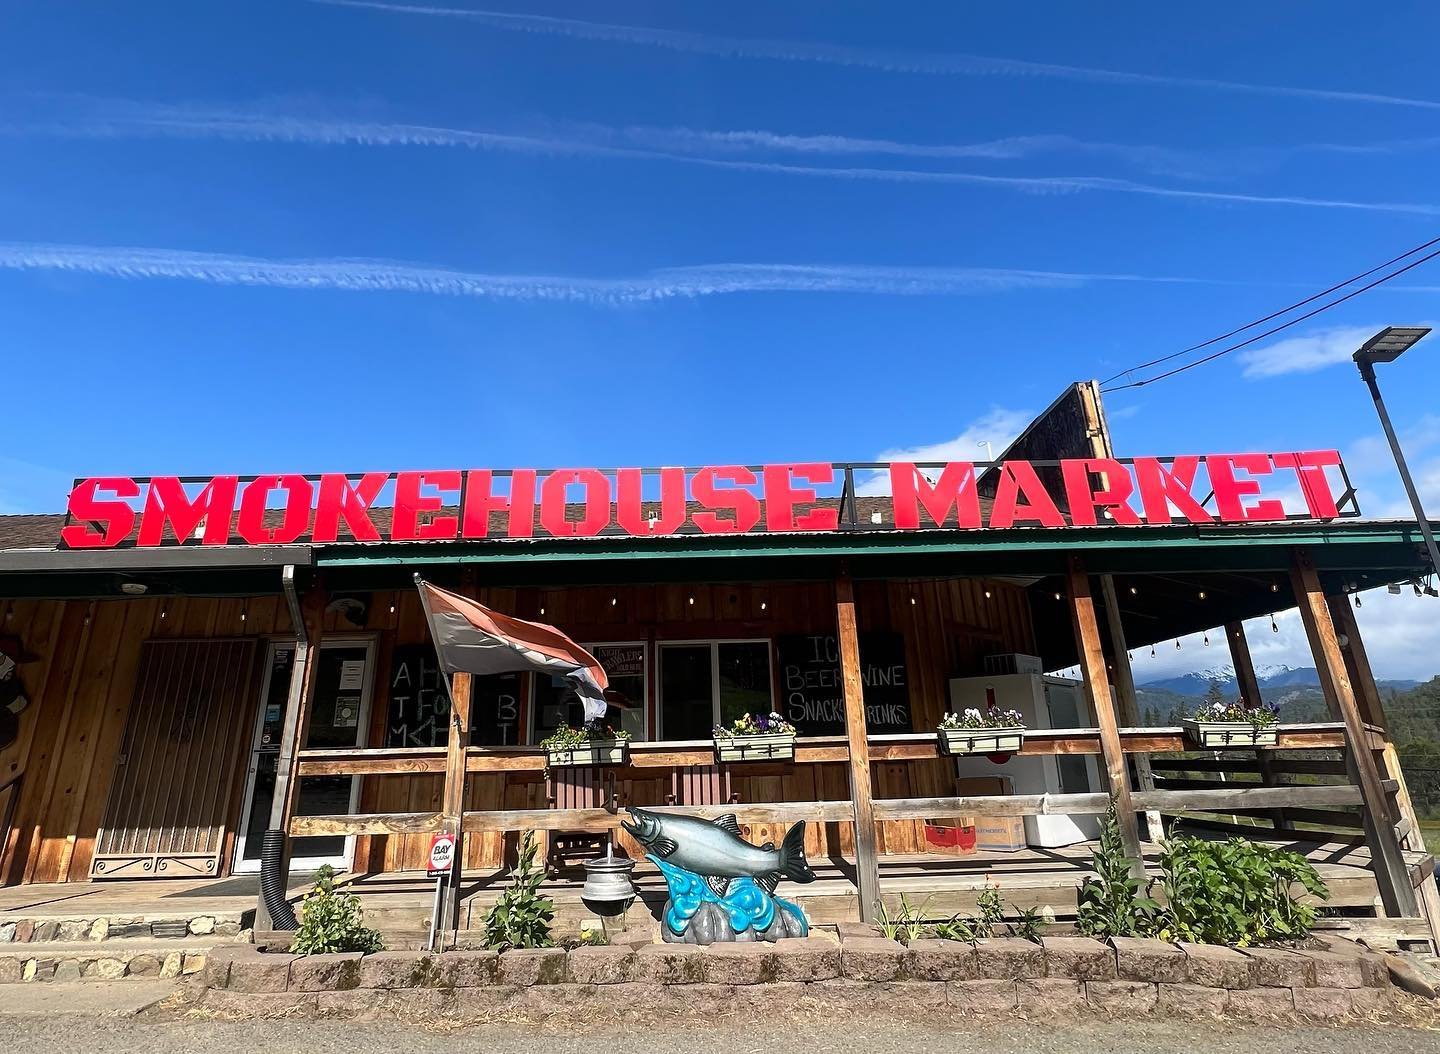 Walked into Smokehouse Market this morning &amp; immediately admired their new Fish art out front! Have you seen it? They are now open Summer hours from 8am- 9pm!